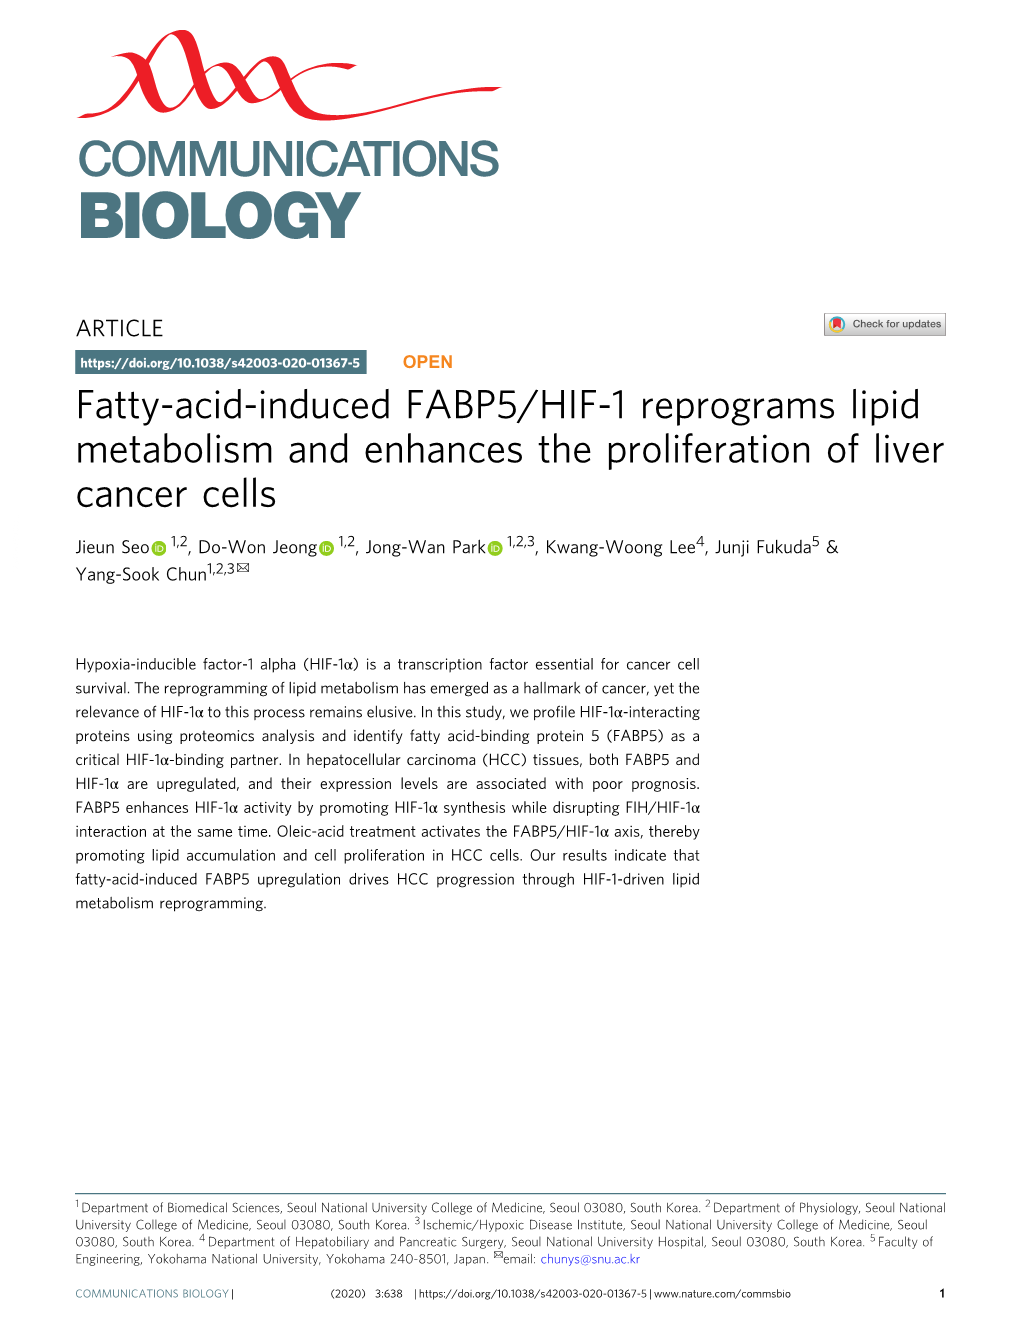 Fatty-Acid-Induced FABP5/HIF-1 Reprograms Lipid Metabolism and Enhances the Proliferation of Liver Cancer Cells